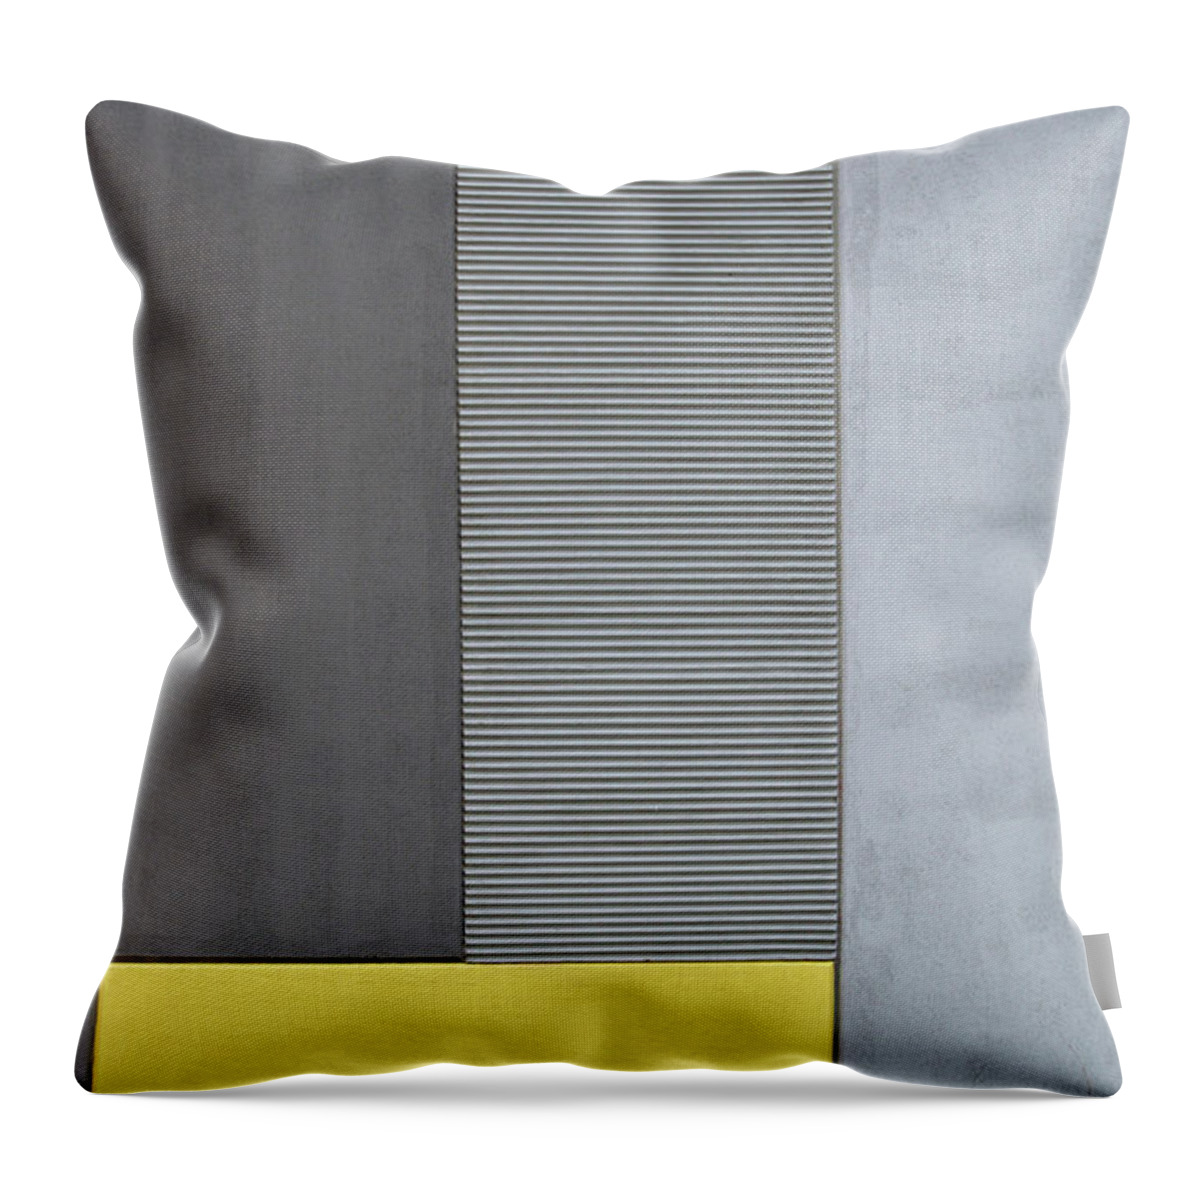 Urban Throw Pillow featuring the photograph Yellow Rectangle by Stuart Allen